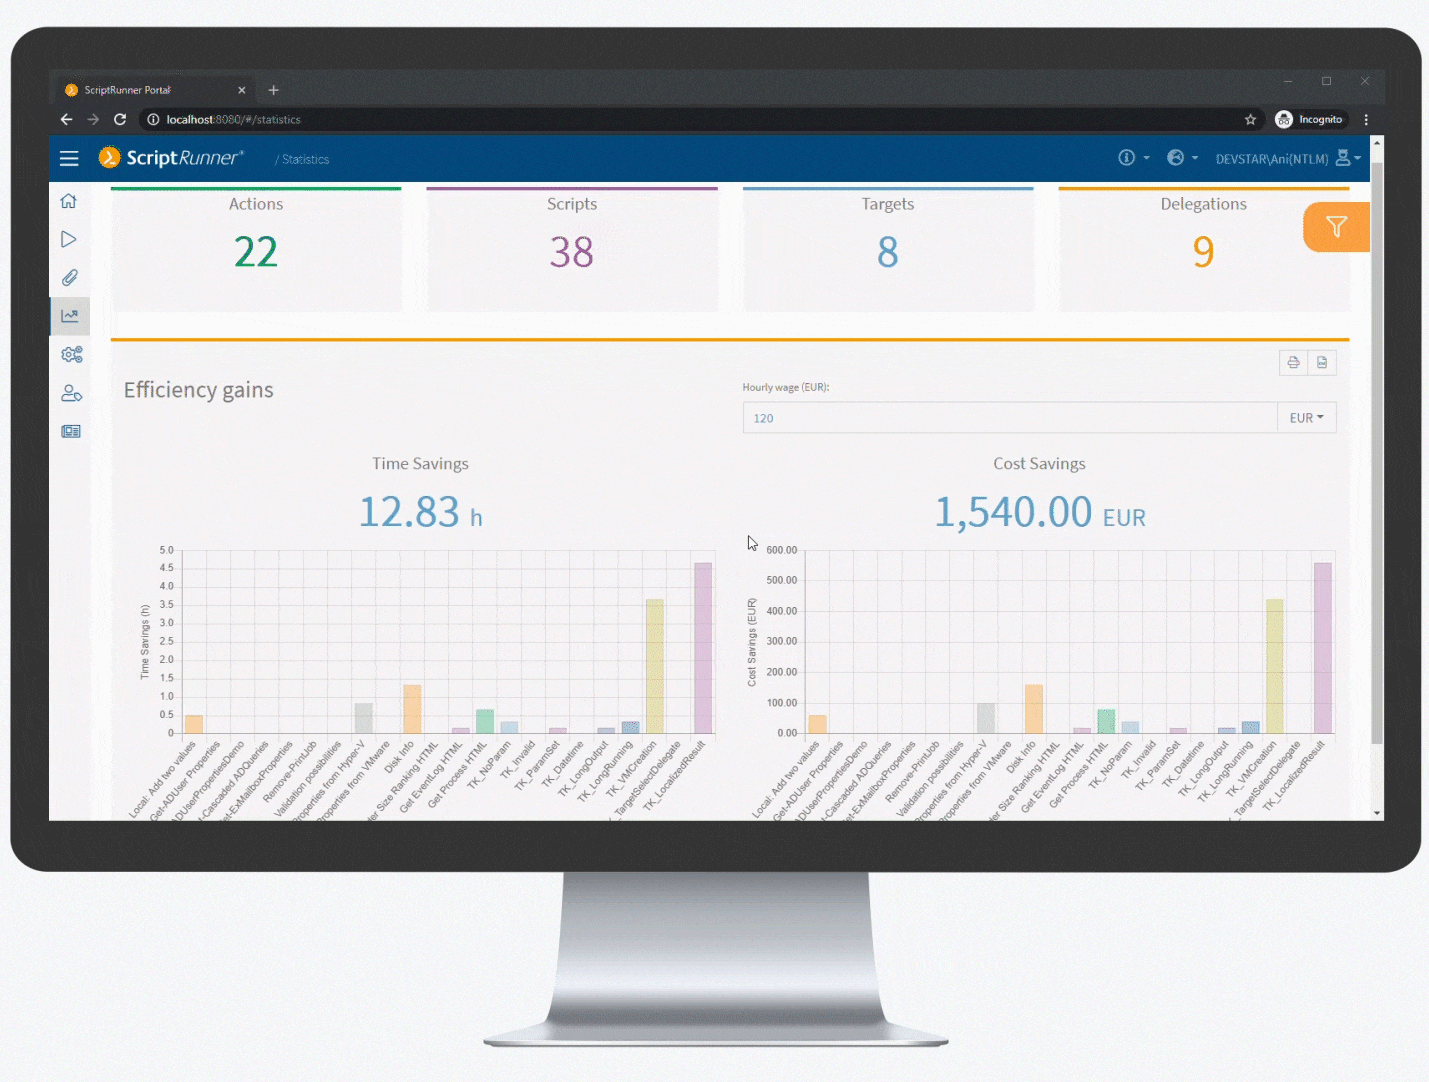 Mockup: The Efficiency Dashboard in the Statistics app shows the savings achieved by using ScriptRunner